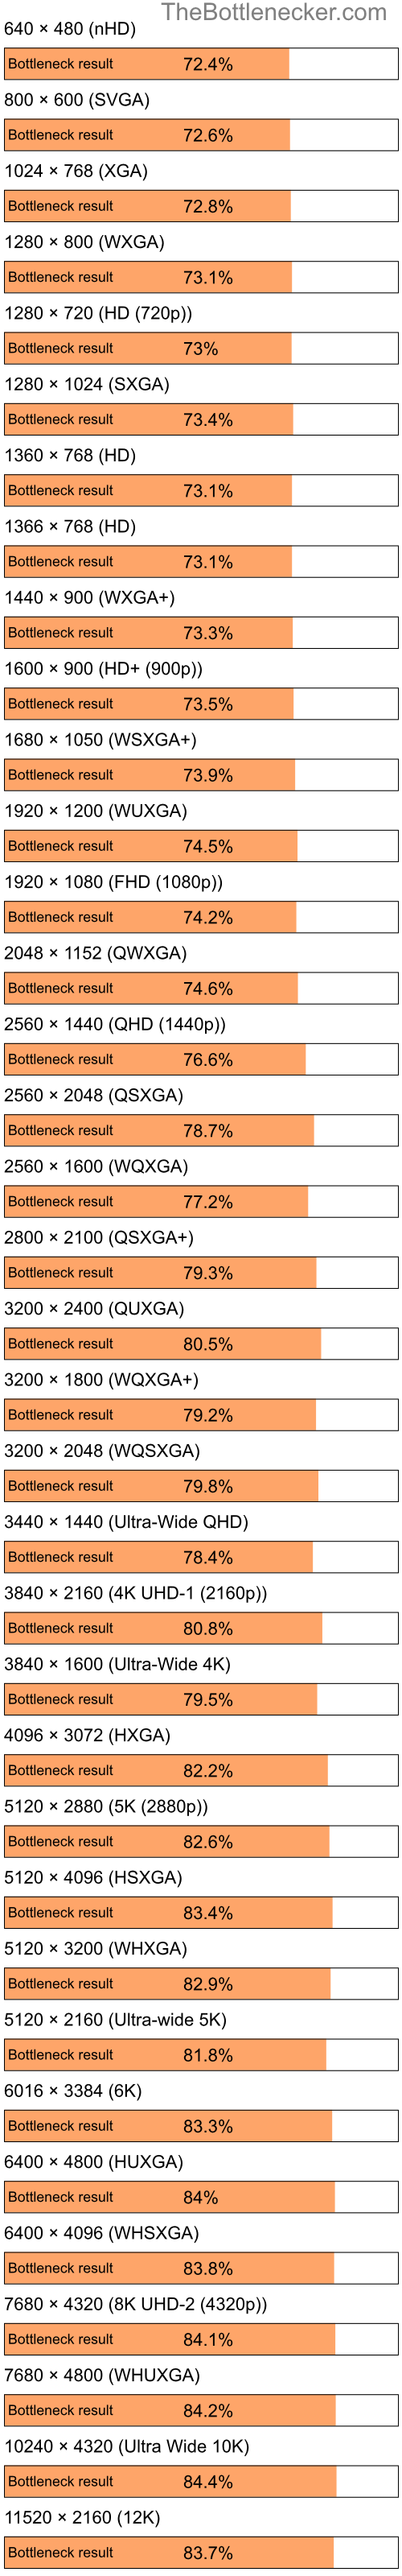 Bottleneck results by resolution for Intel Celeron and NVIDIA GeForce Go 6600 in Graphic Card Intense Tasks